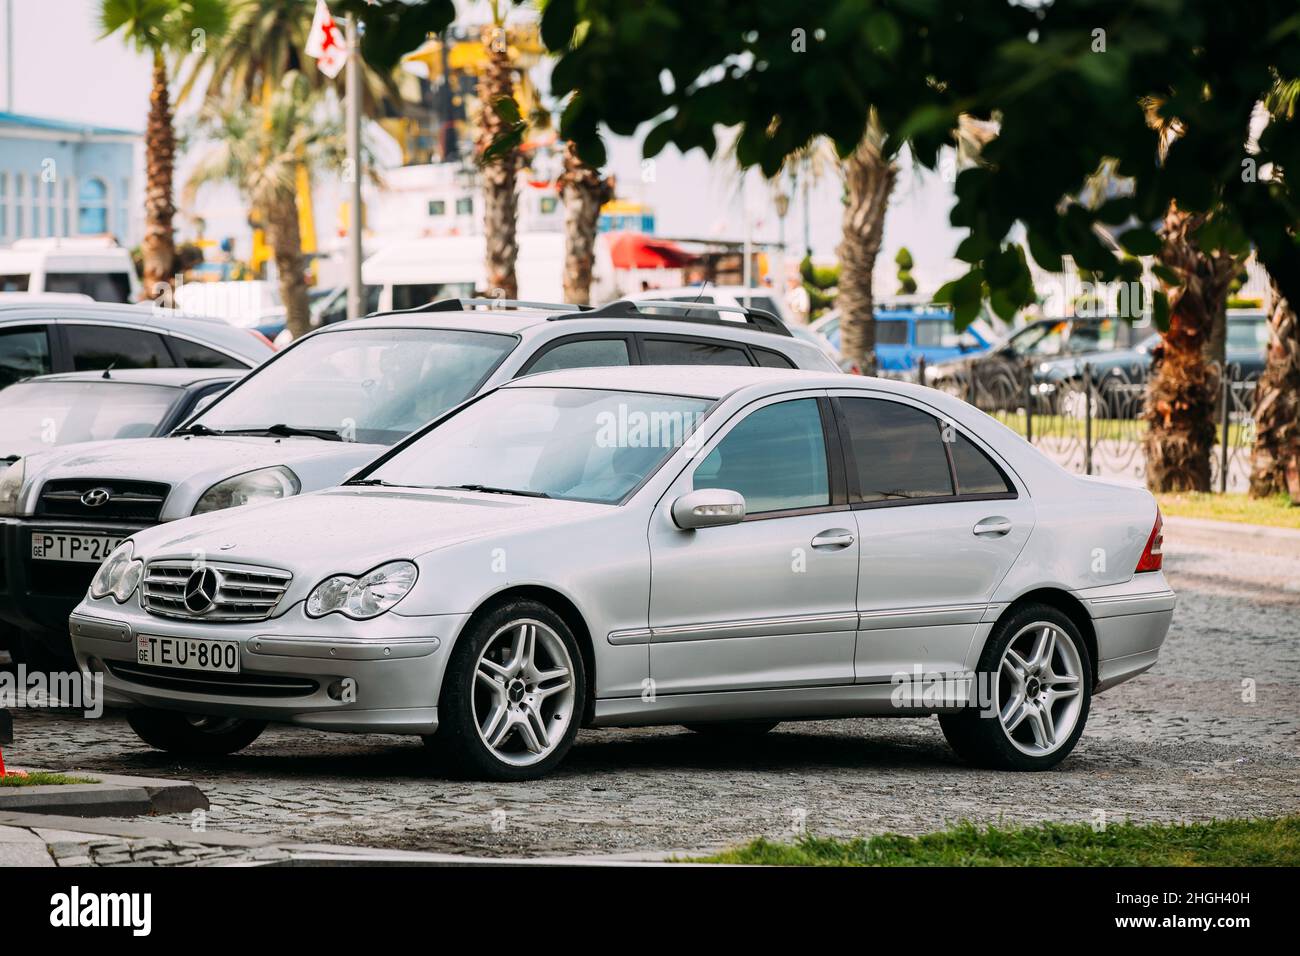 Mercedes-Benz C-Class (W203) Car Parked In street on Sunny Summer Day. W203 is an automobile which was produced by German manufacturer Mercedes-Benz Stock Photo